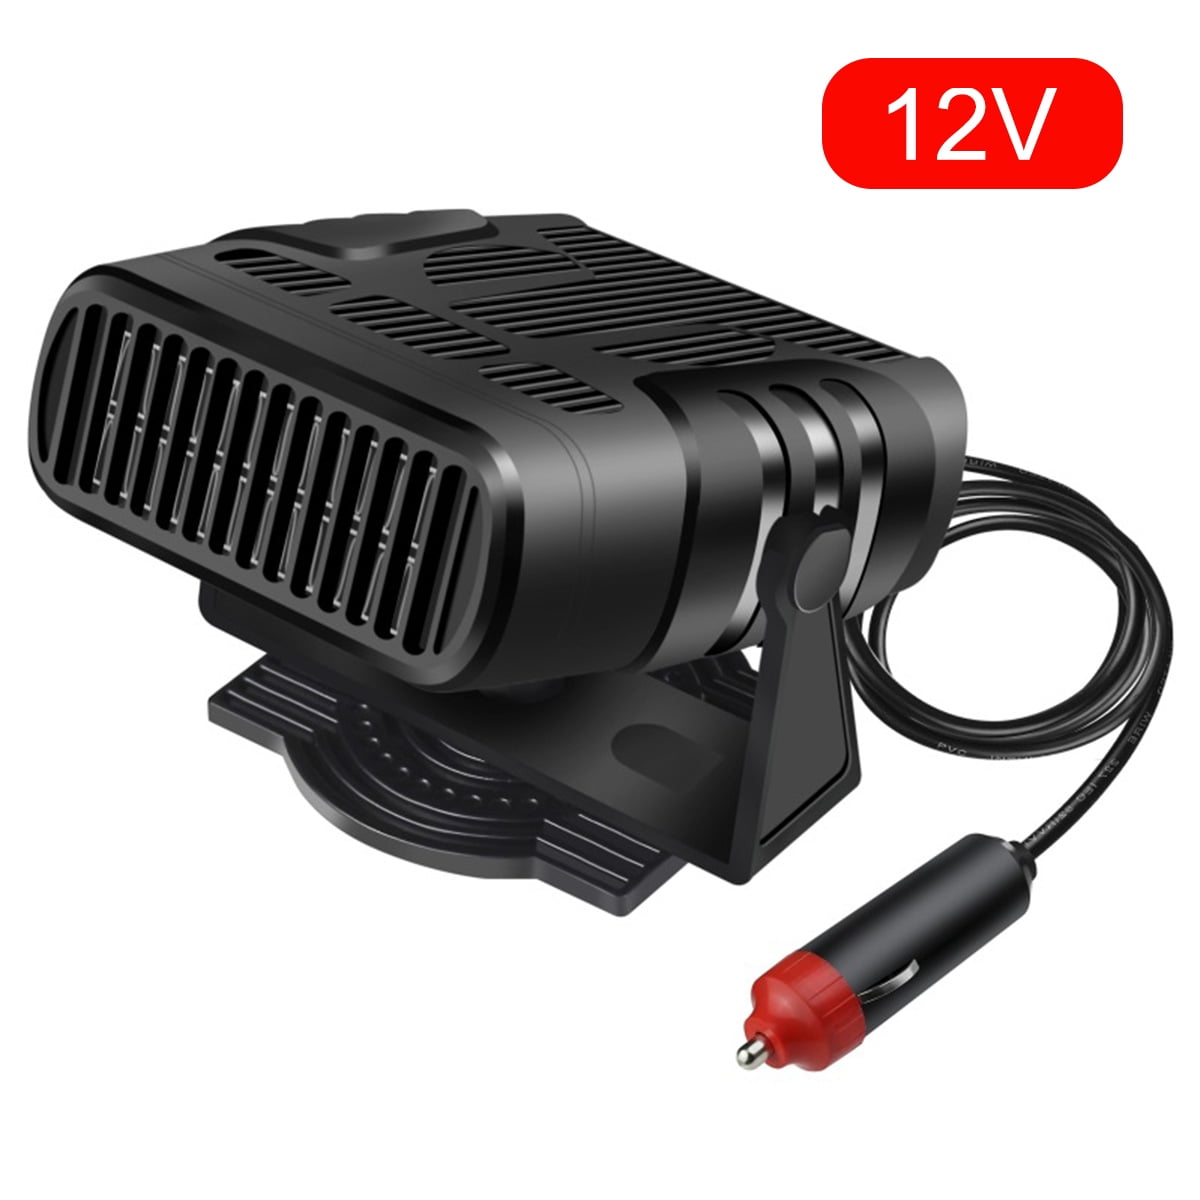 5 Pcs Heater Windshield Defogger 150w Portable Vehicle Cooling Fan Portable  Defroster for Car Windshield Defroster 2 in 1 Fast Heating Cooling Fan Abs